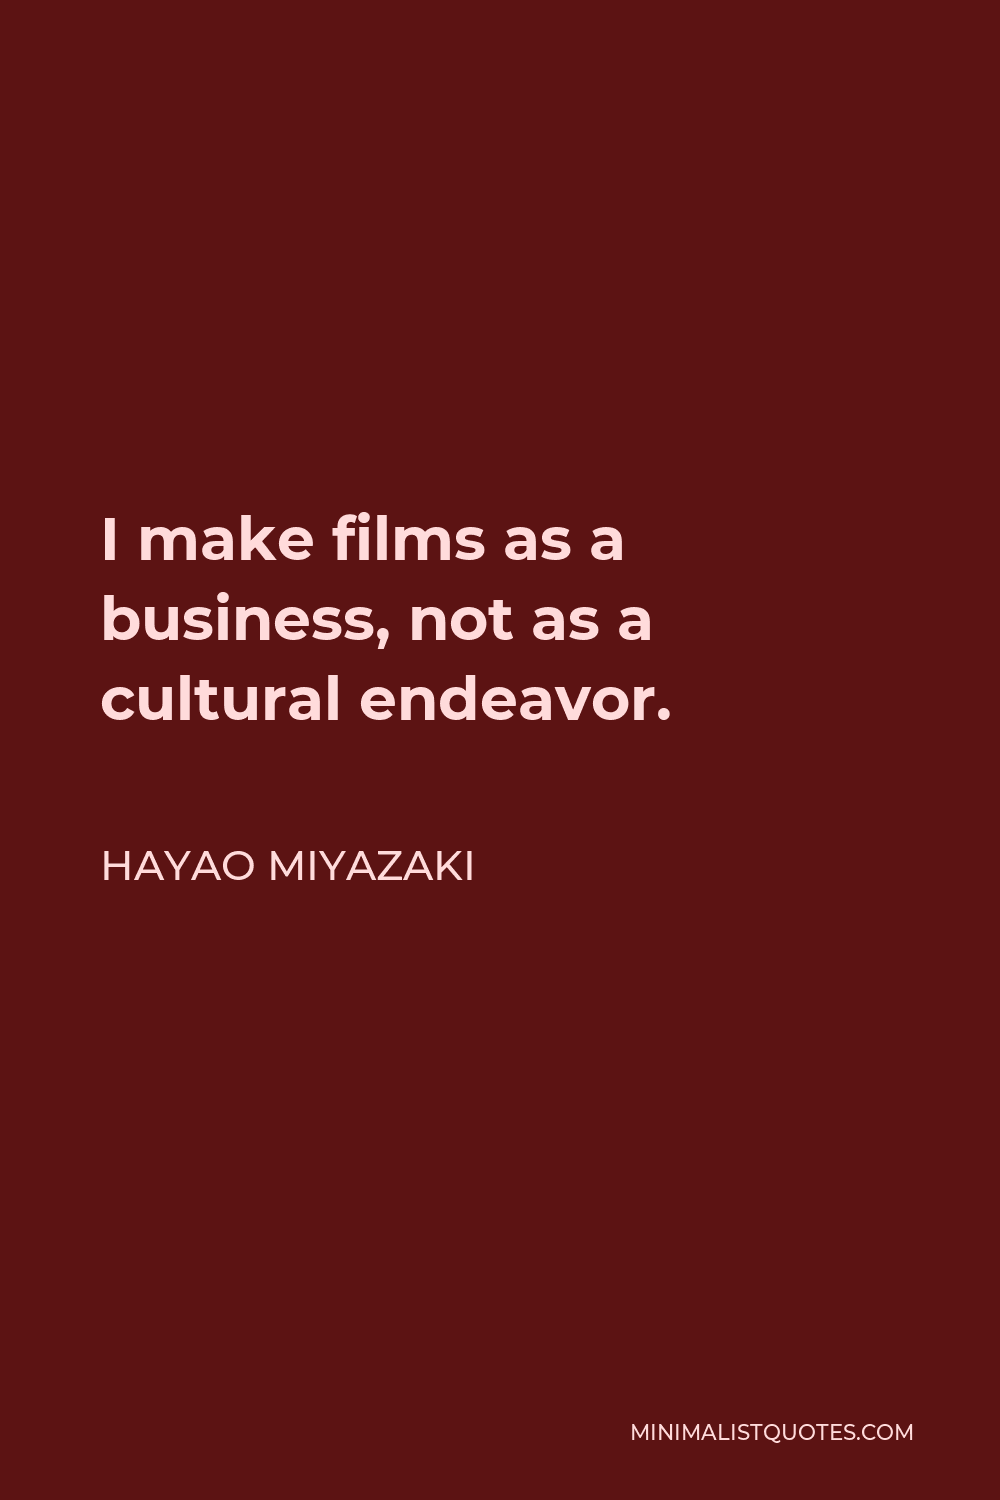 Hayao Miyazaki Quote - I make films as a business, not as a cultural endeavor.